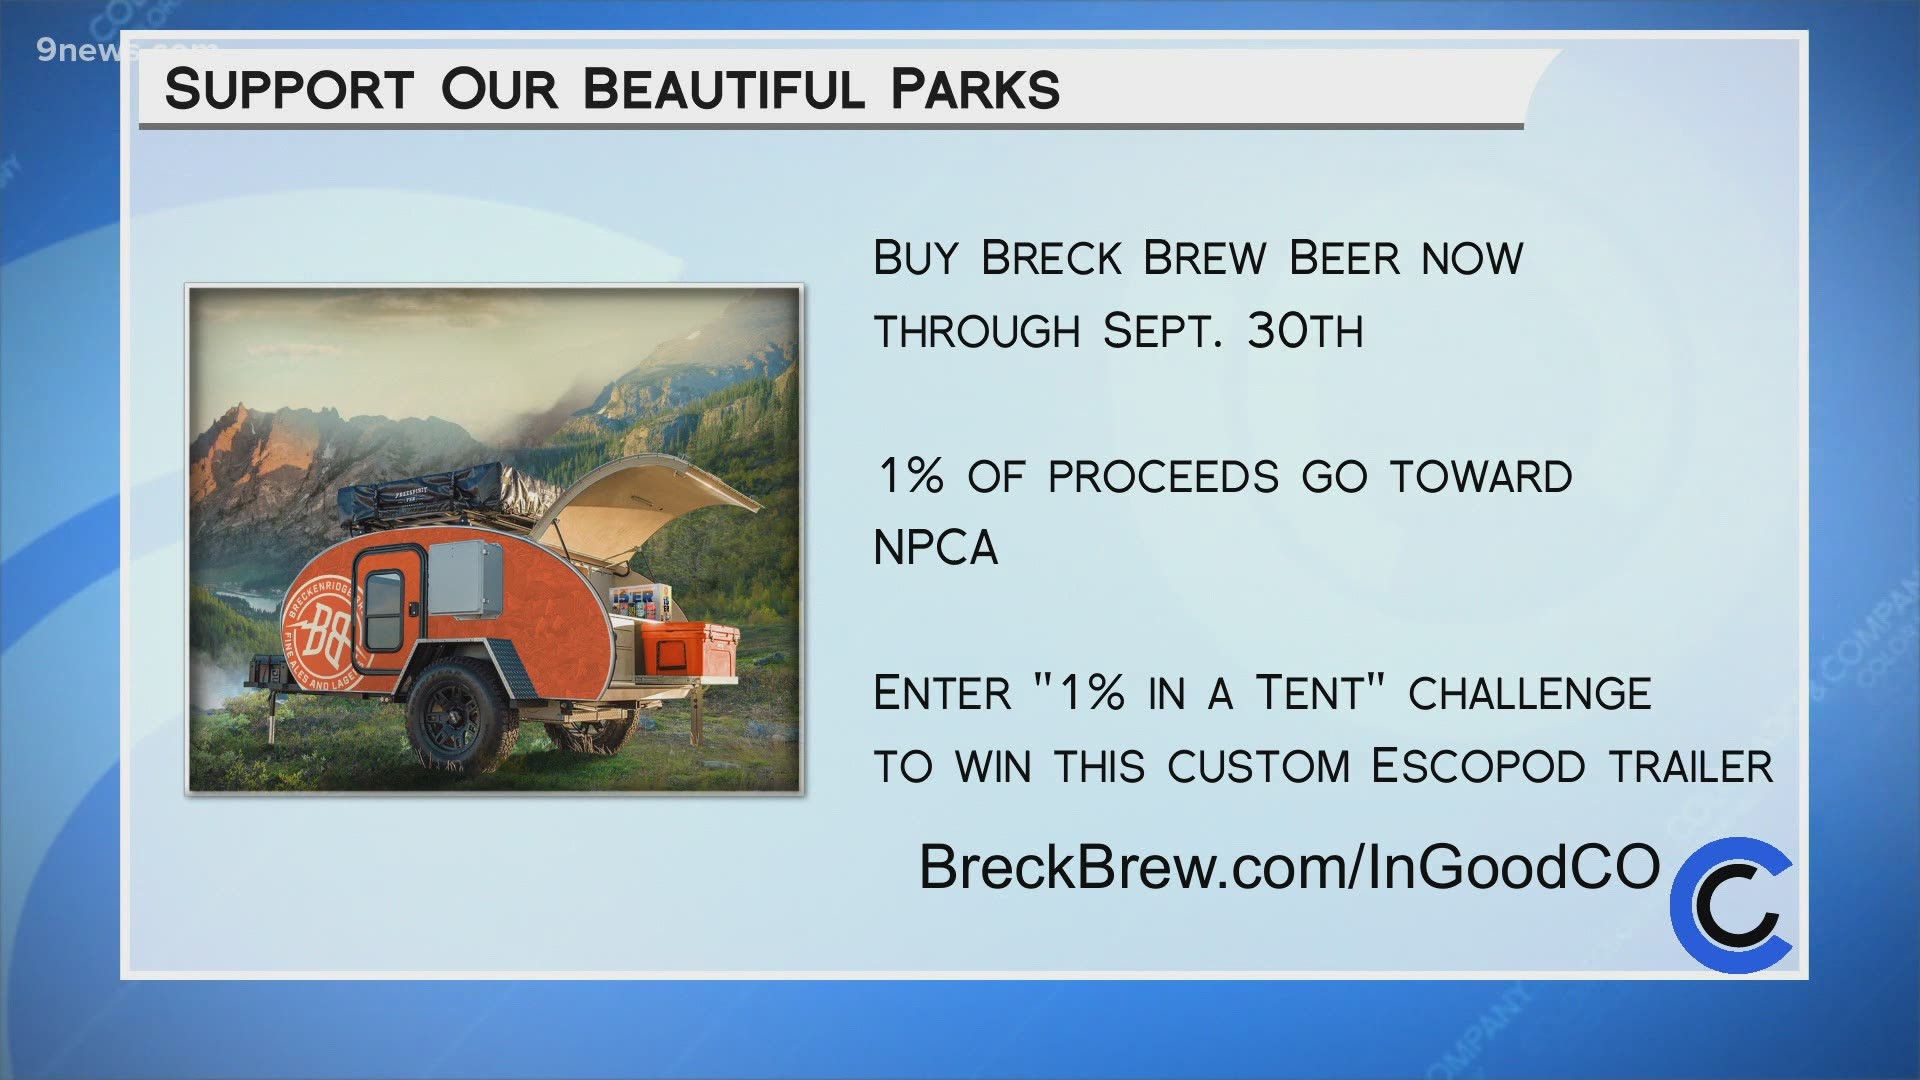 Support the NPCA by drinking Breck Brews! 1% of the proceeds will go to helping our national parks. Learn more at BreckBrew.com/GoodCO